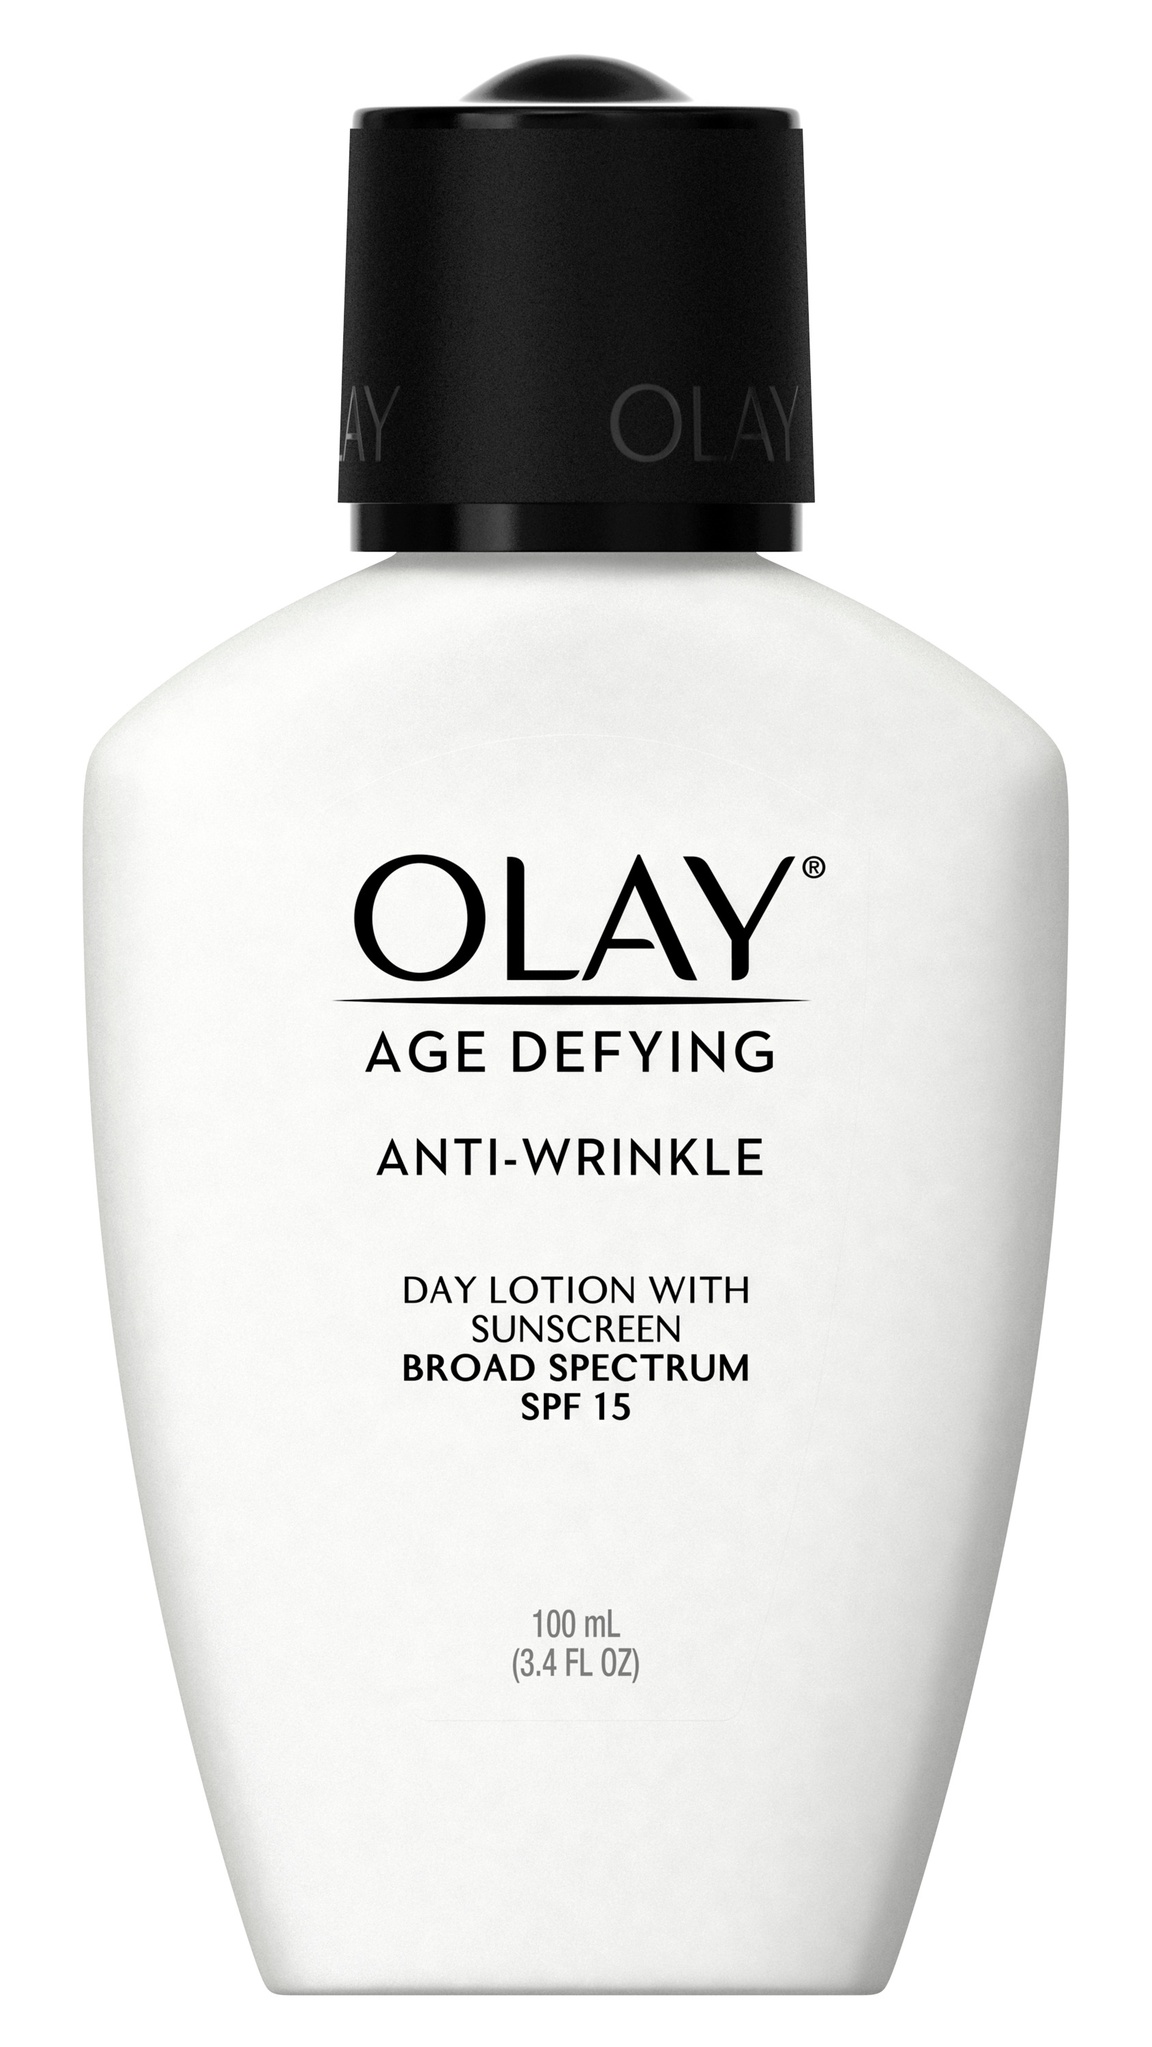 Olay Age Defying Anti-wrinkle Day Face Lotion With Sunscreen - SPF 15